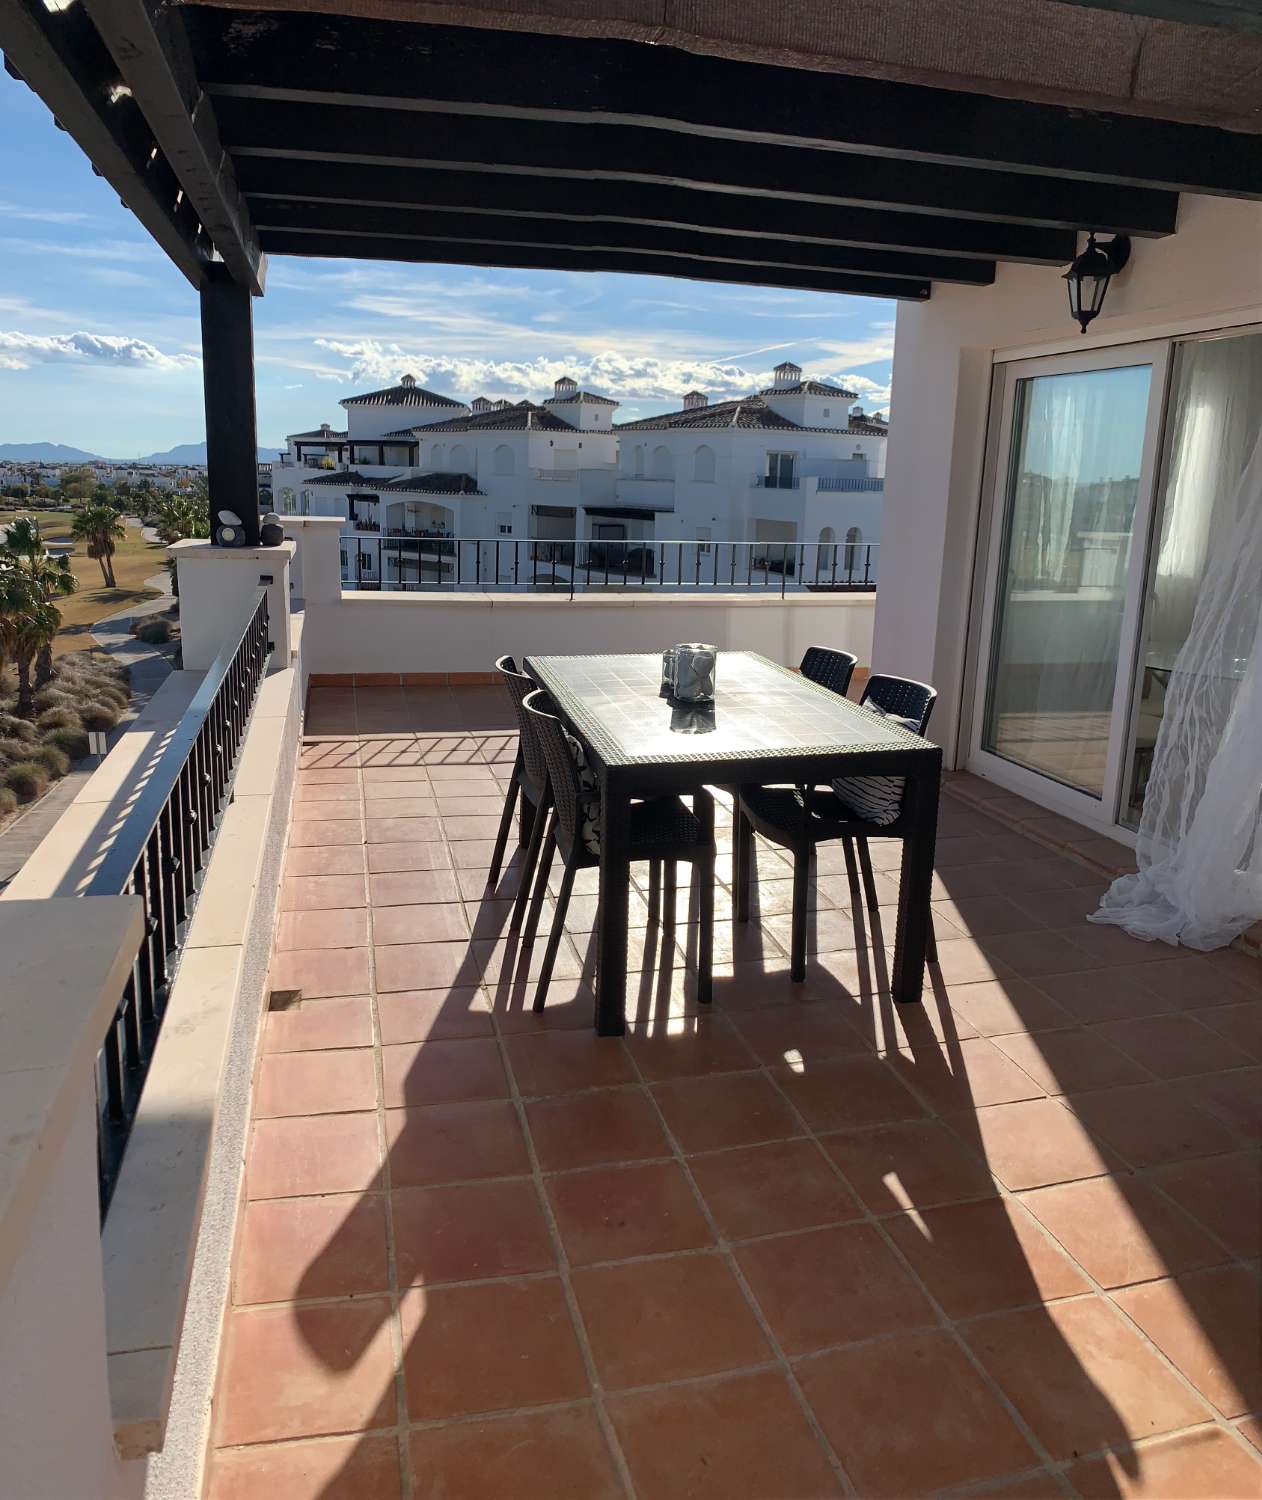 PENTHOUSE FOR SALE WITH FABULOUS VIEWS IN LA TORRE GOLF RESORT